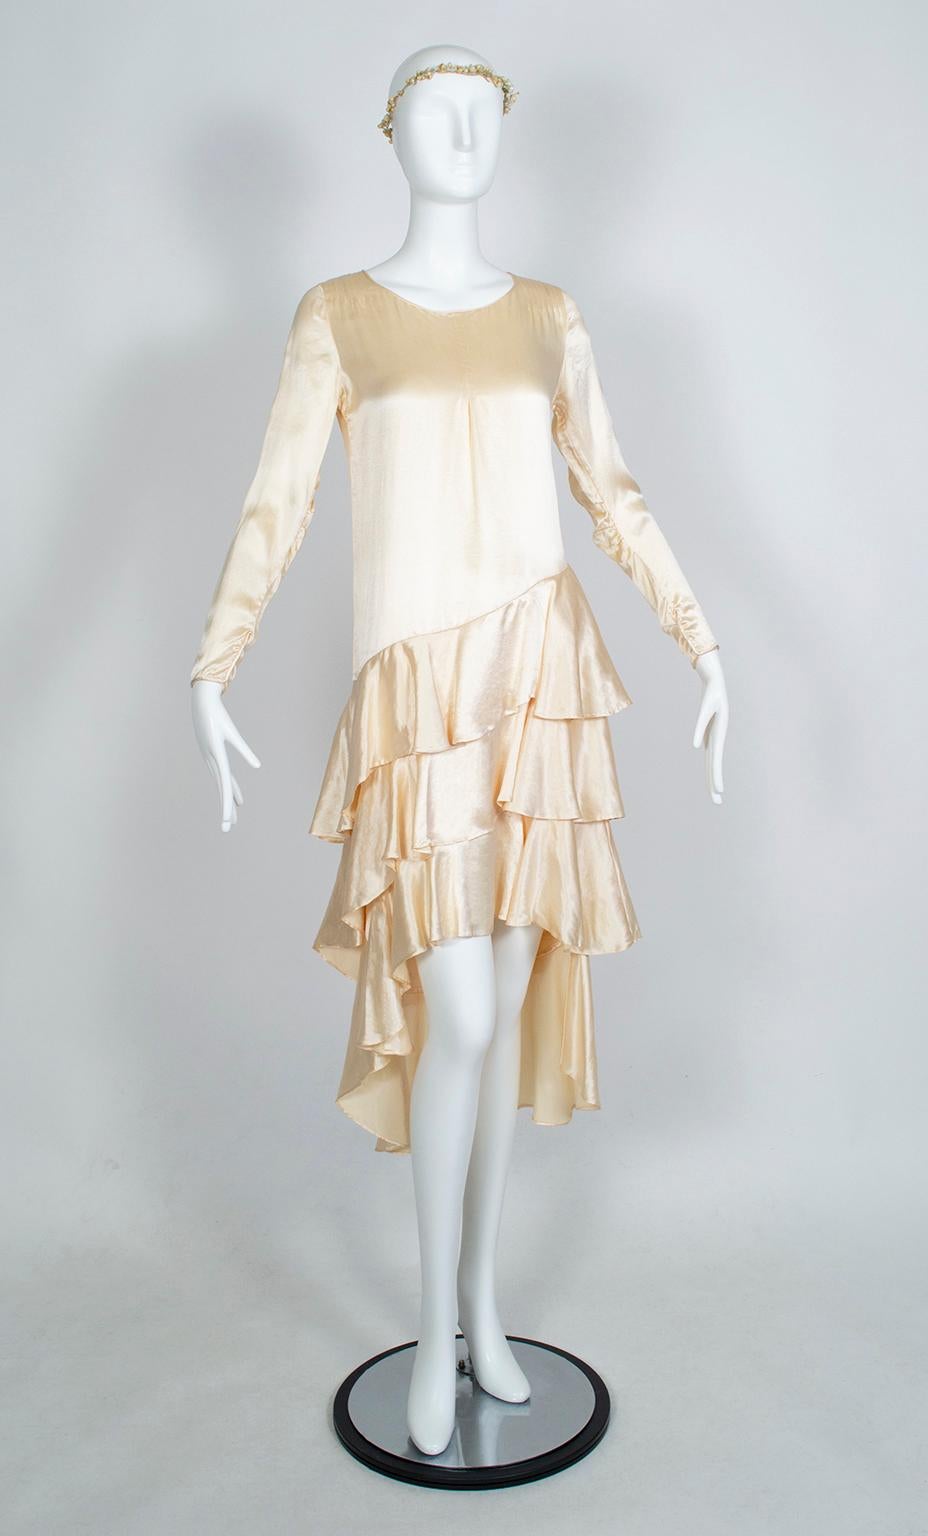 A flapper fashionista’s dream, this wedding dress prevents a bride from having to choose between a short or long hemline: it has both! Over a foot longer in the back than at the front, the skirt is made even more interesting because of its multiple